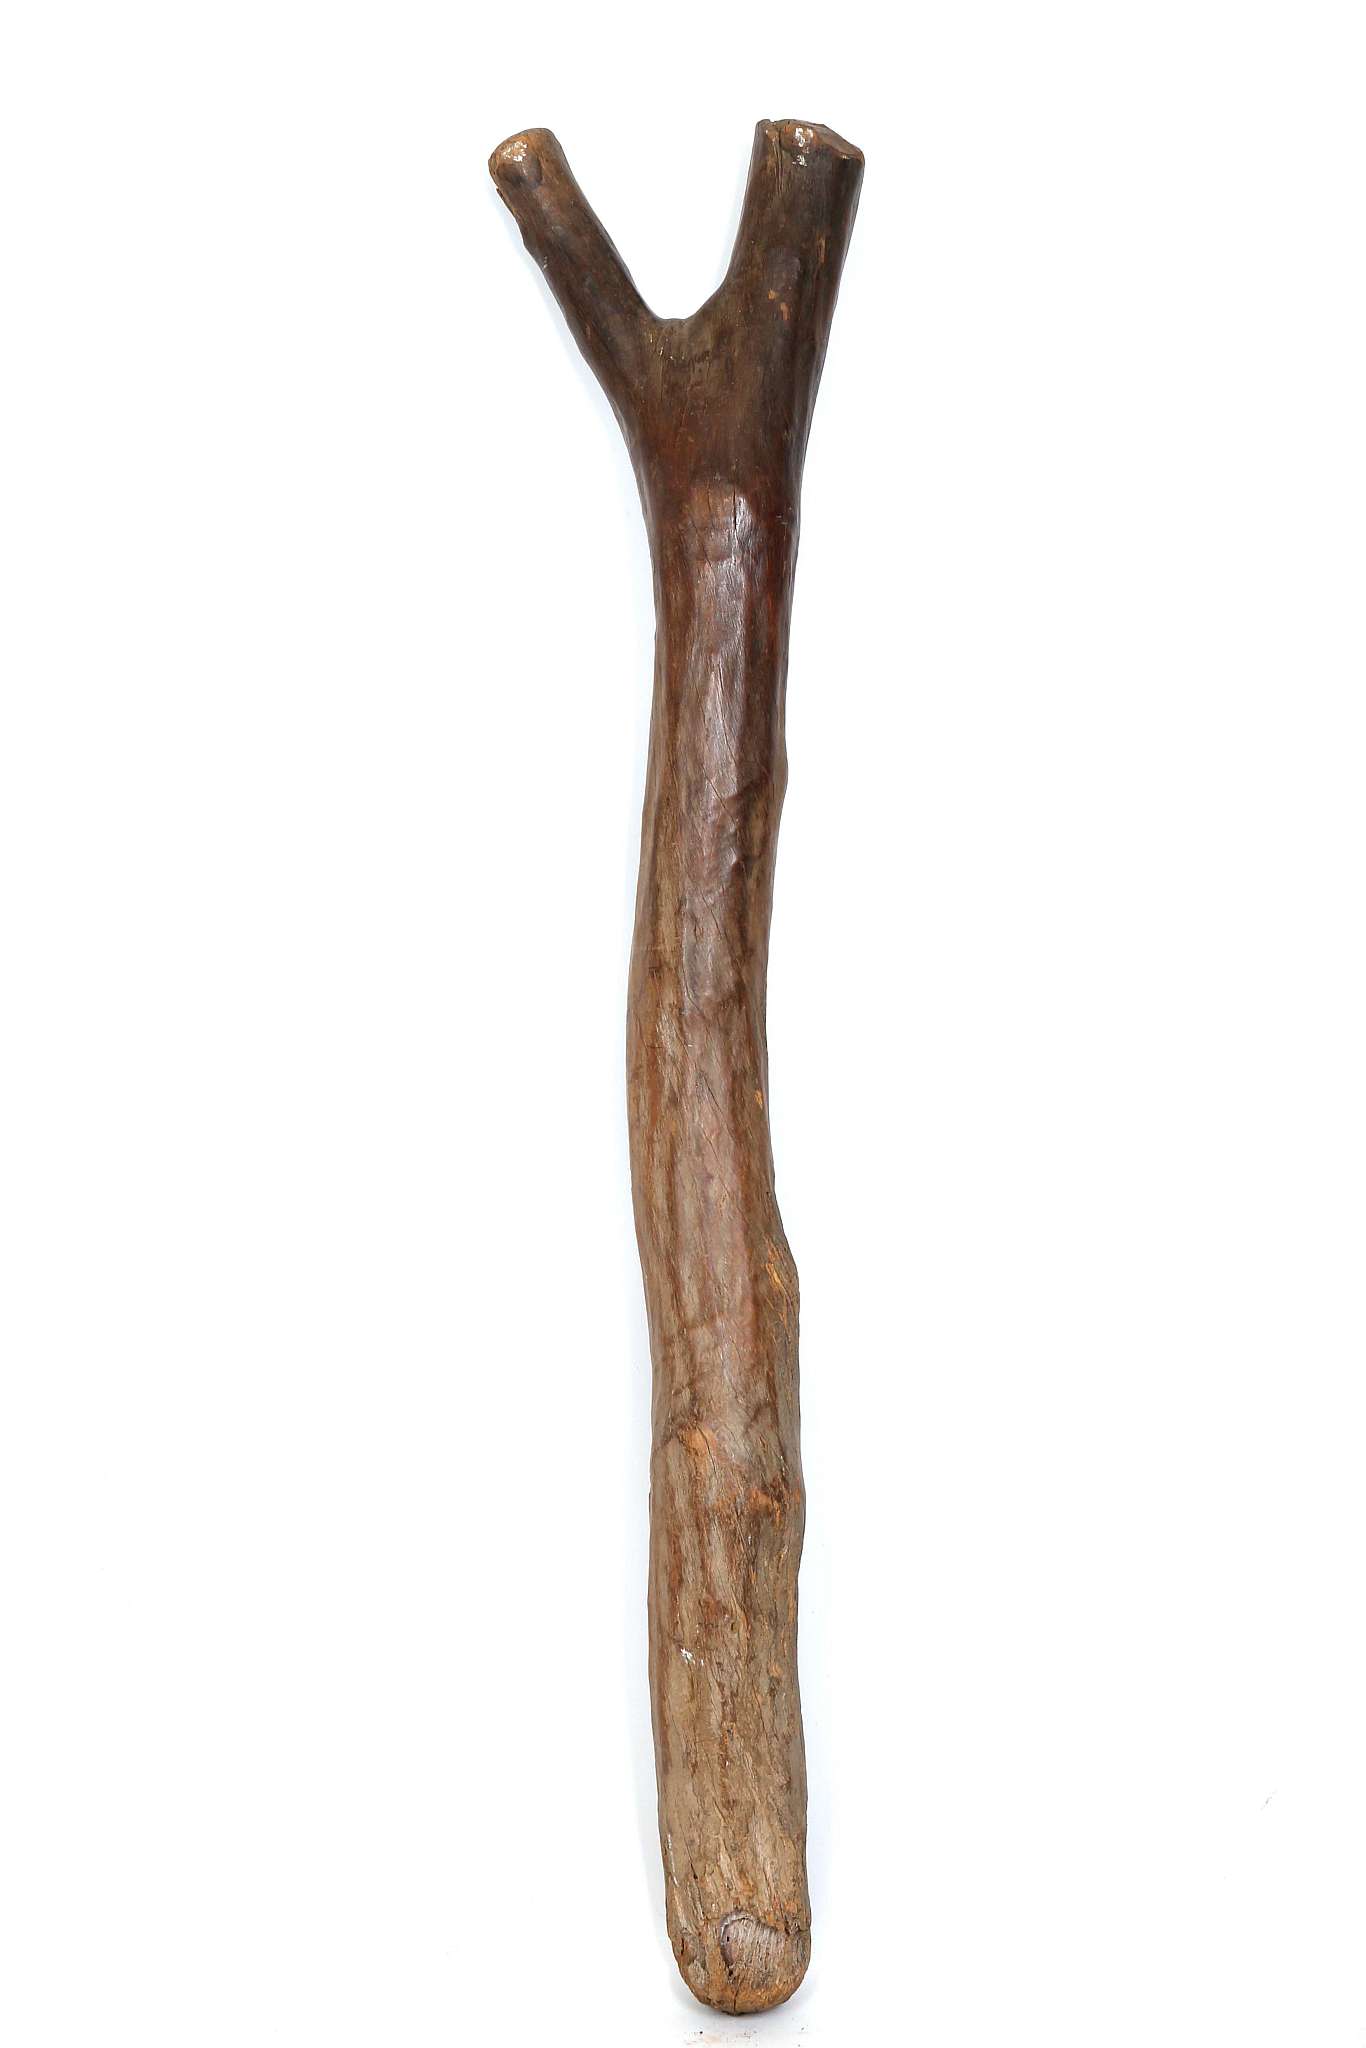 A DOGON LADDER, MALI Of typical stepped, Y-shaped form, with shiny brown patina, 163cm high - Image 2 of 4